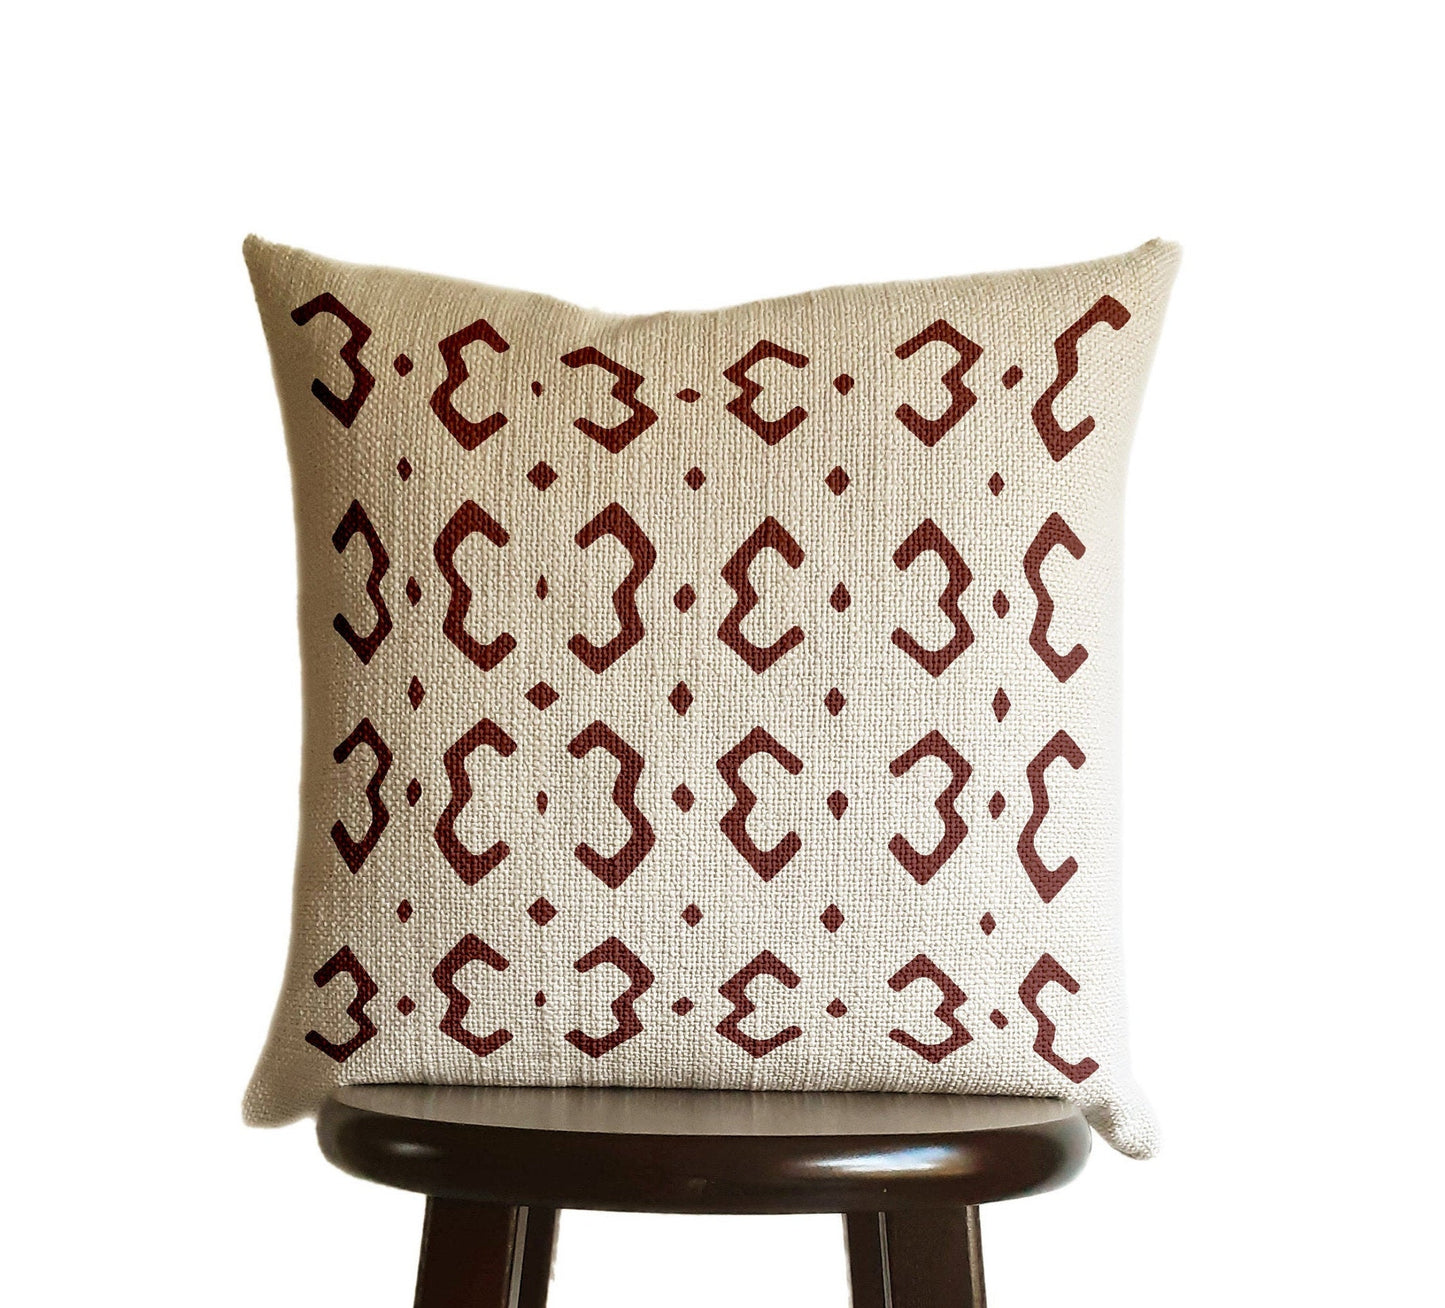 Burgundy Pillow Cover, Maroon Wine Tribal Urban Ethnic Square 18x18 in Natural Oatmeal Color Textured Woven Fabric in Modern Boho Home Decor